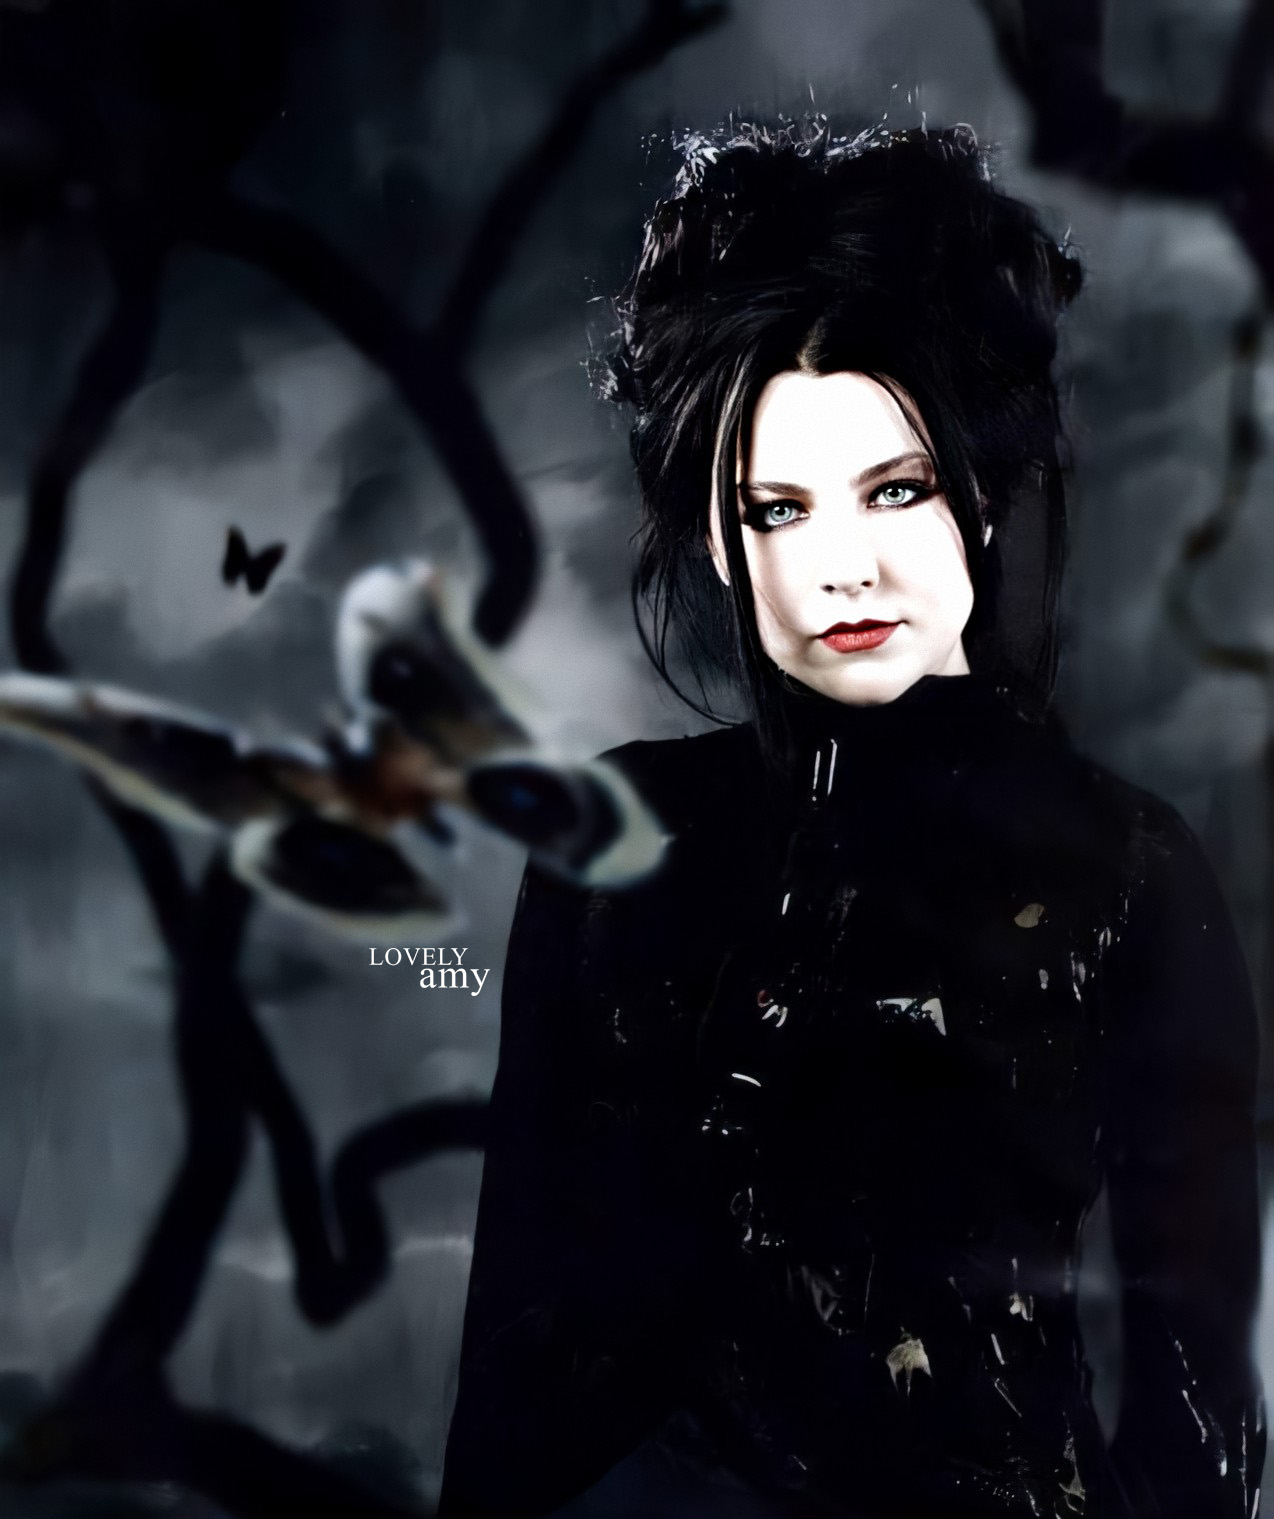 1274x1519
Keywords: amy lee;photoshoot;the open door;black and white;butterfly